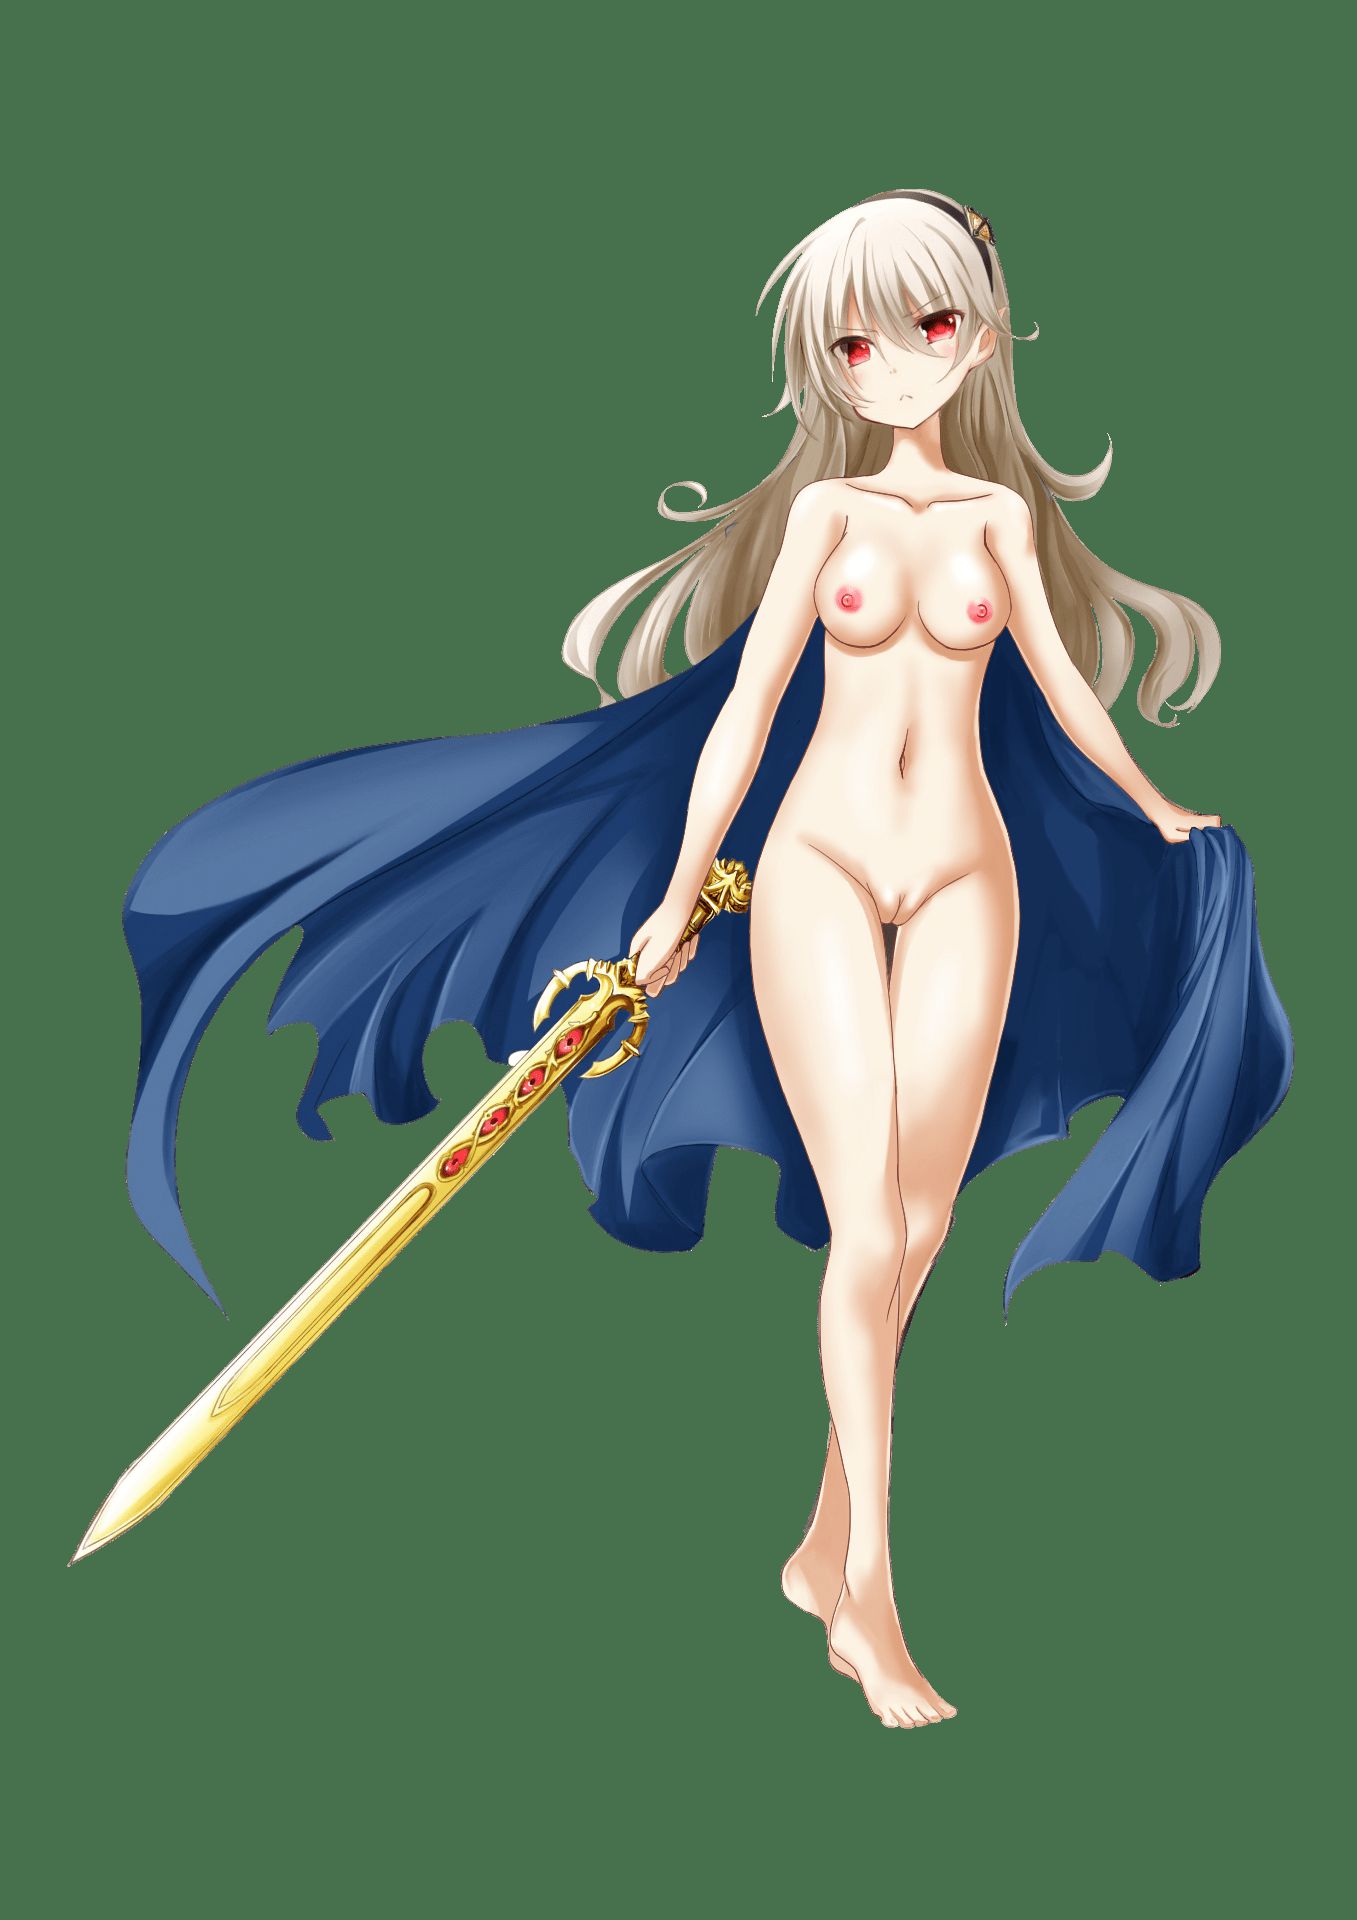 【Erocora Character Material】PNG background transparent erotic image such as anime characters Part 421 46